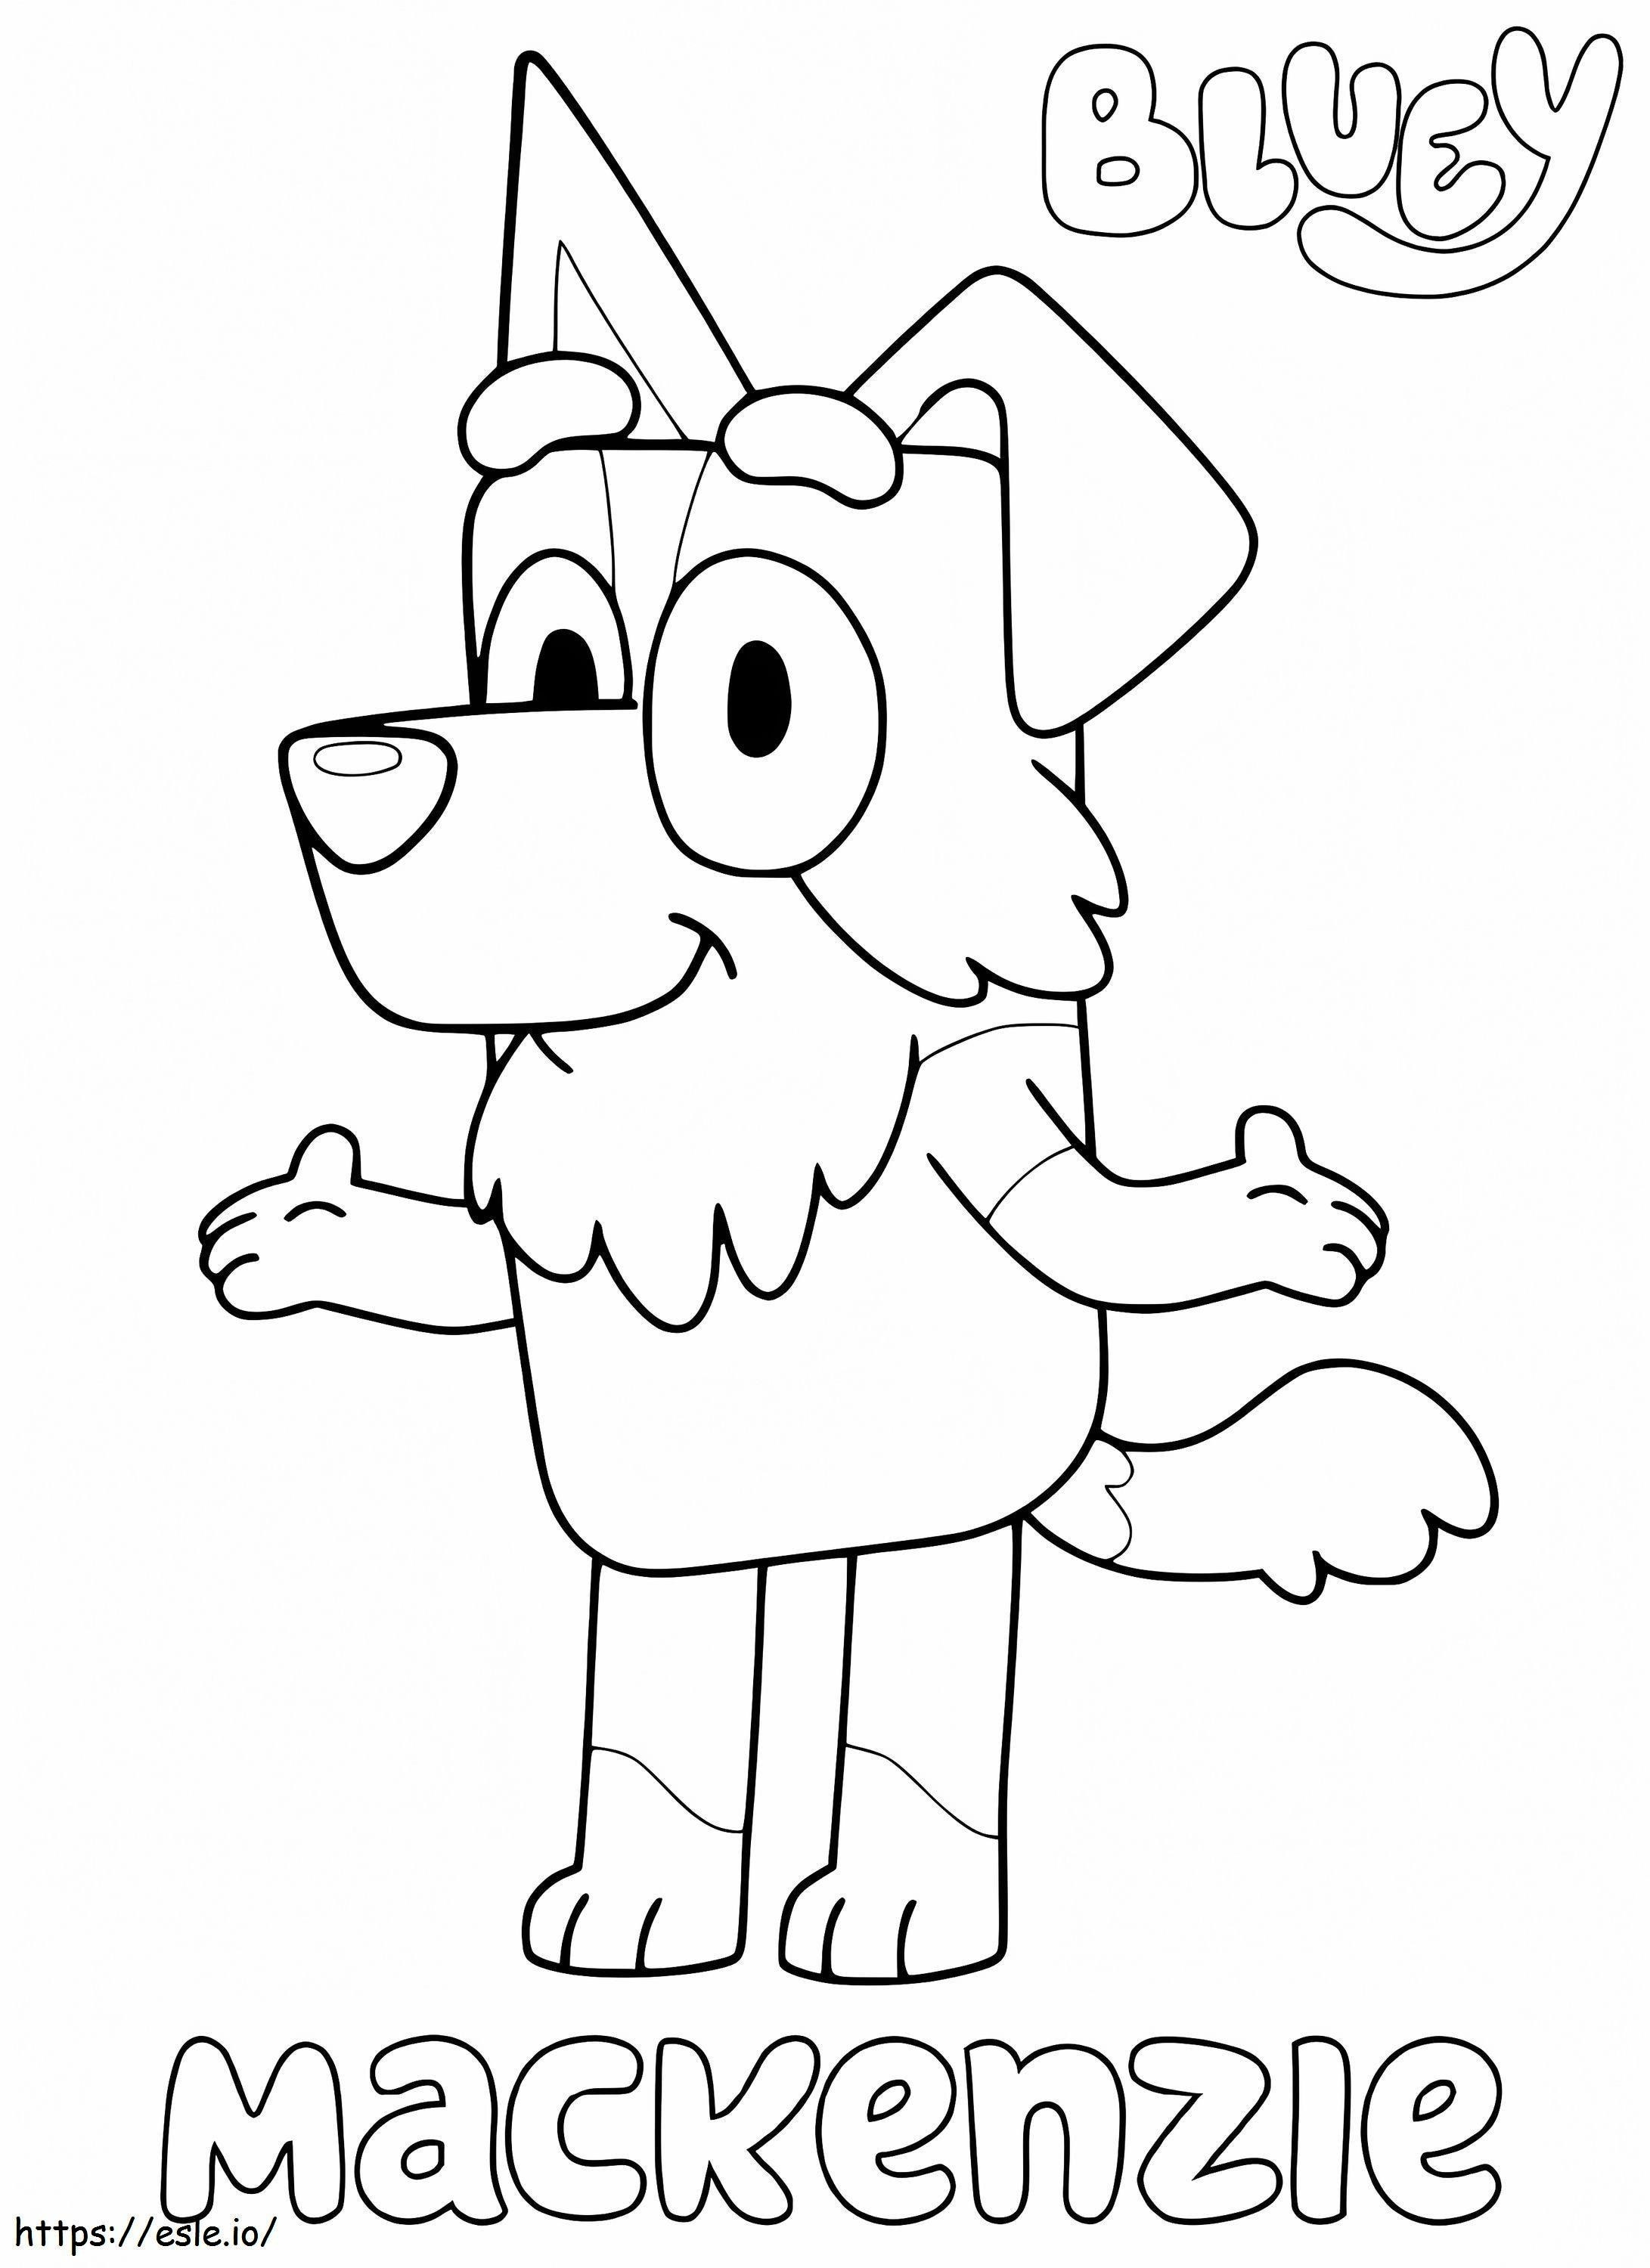 1591580029 1582826874Mackenzie From Blueys coloring page